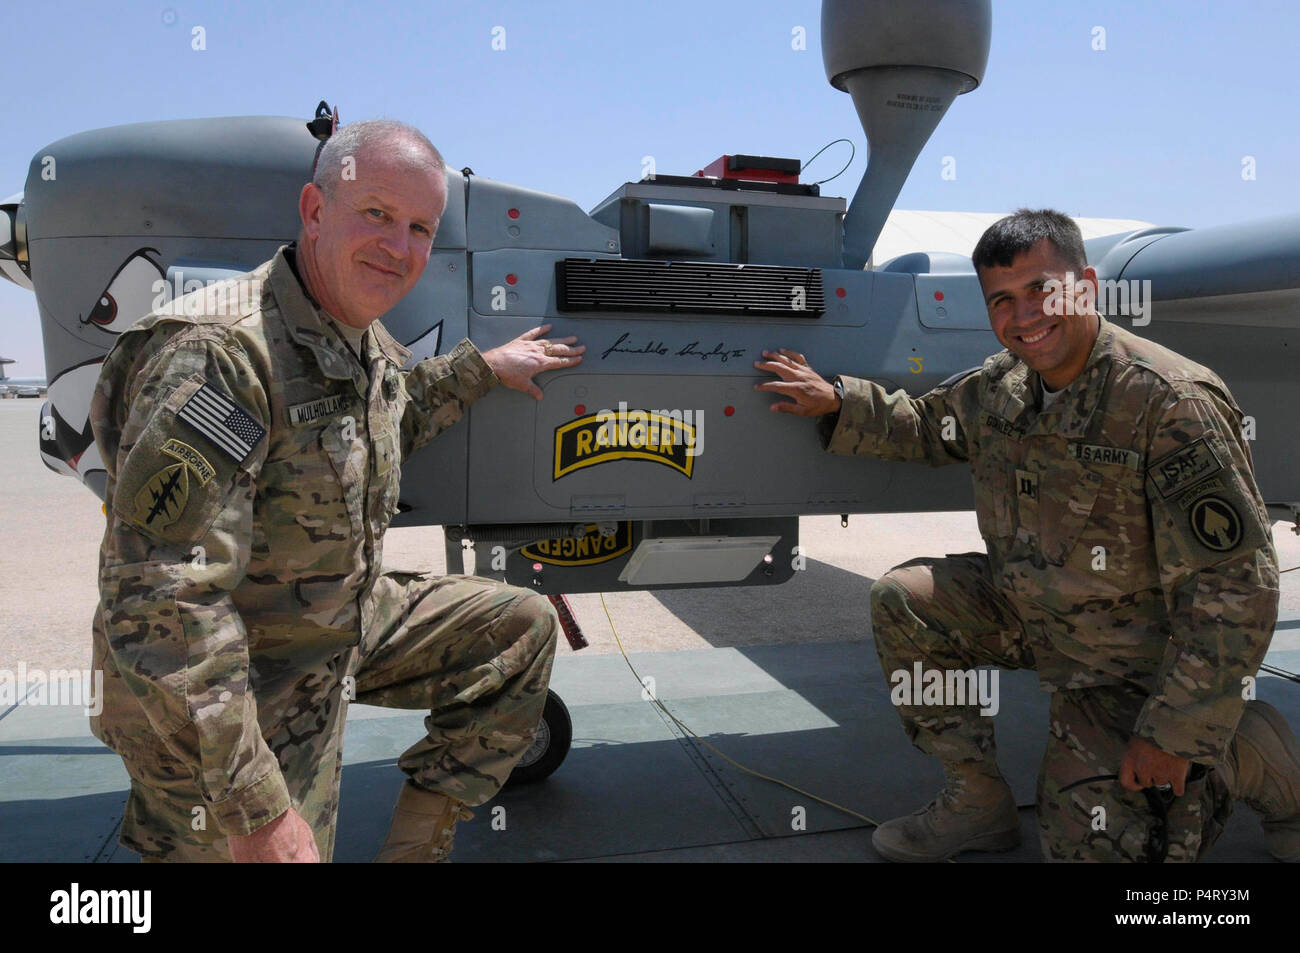 MAZAR-E SHARIF, Afghanistan (July 21, 2011) Brig. Gen. Sean Mulholland and Capt. Reinaldo Gonzalez of International Security Assistance Force, Regional Command North Headquarters, pose with a Hunter unmanned aerial vehicle named for Gonzalez’s fighting spirit at a ceremony on Camp Marmal. Gonzalez suffered a broken neck and back in a training accident and has fought through rehabilitation to return to duty, now serving as aide to Mulholland, deputy commander of RC North. Stock Photo